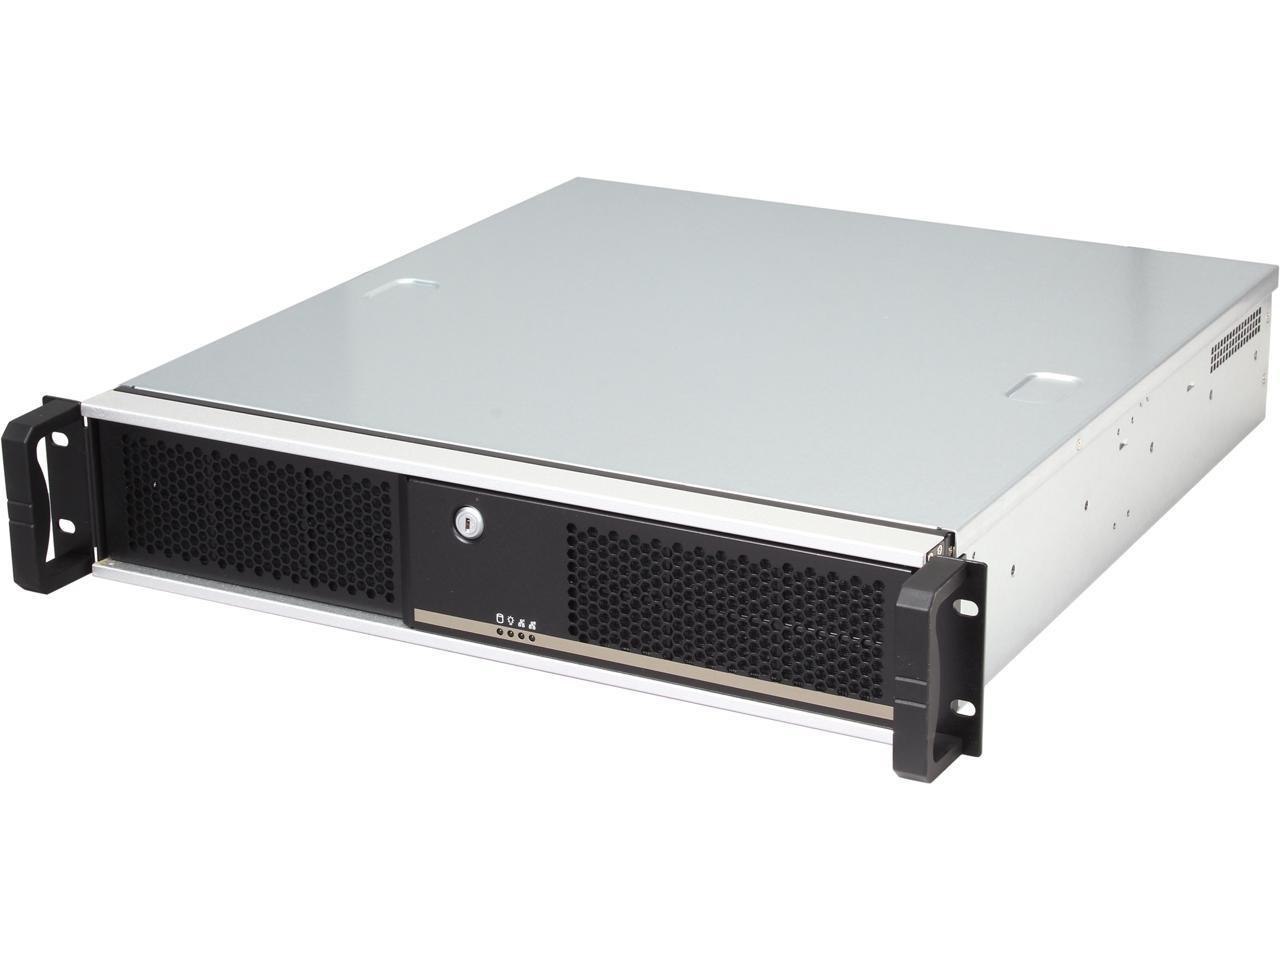 Chenbro RM24100-L2 2U Feature-Advanced Industrial Server Chassis